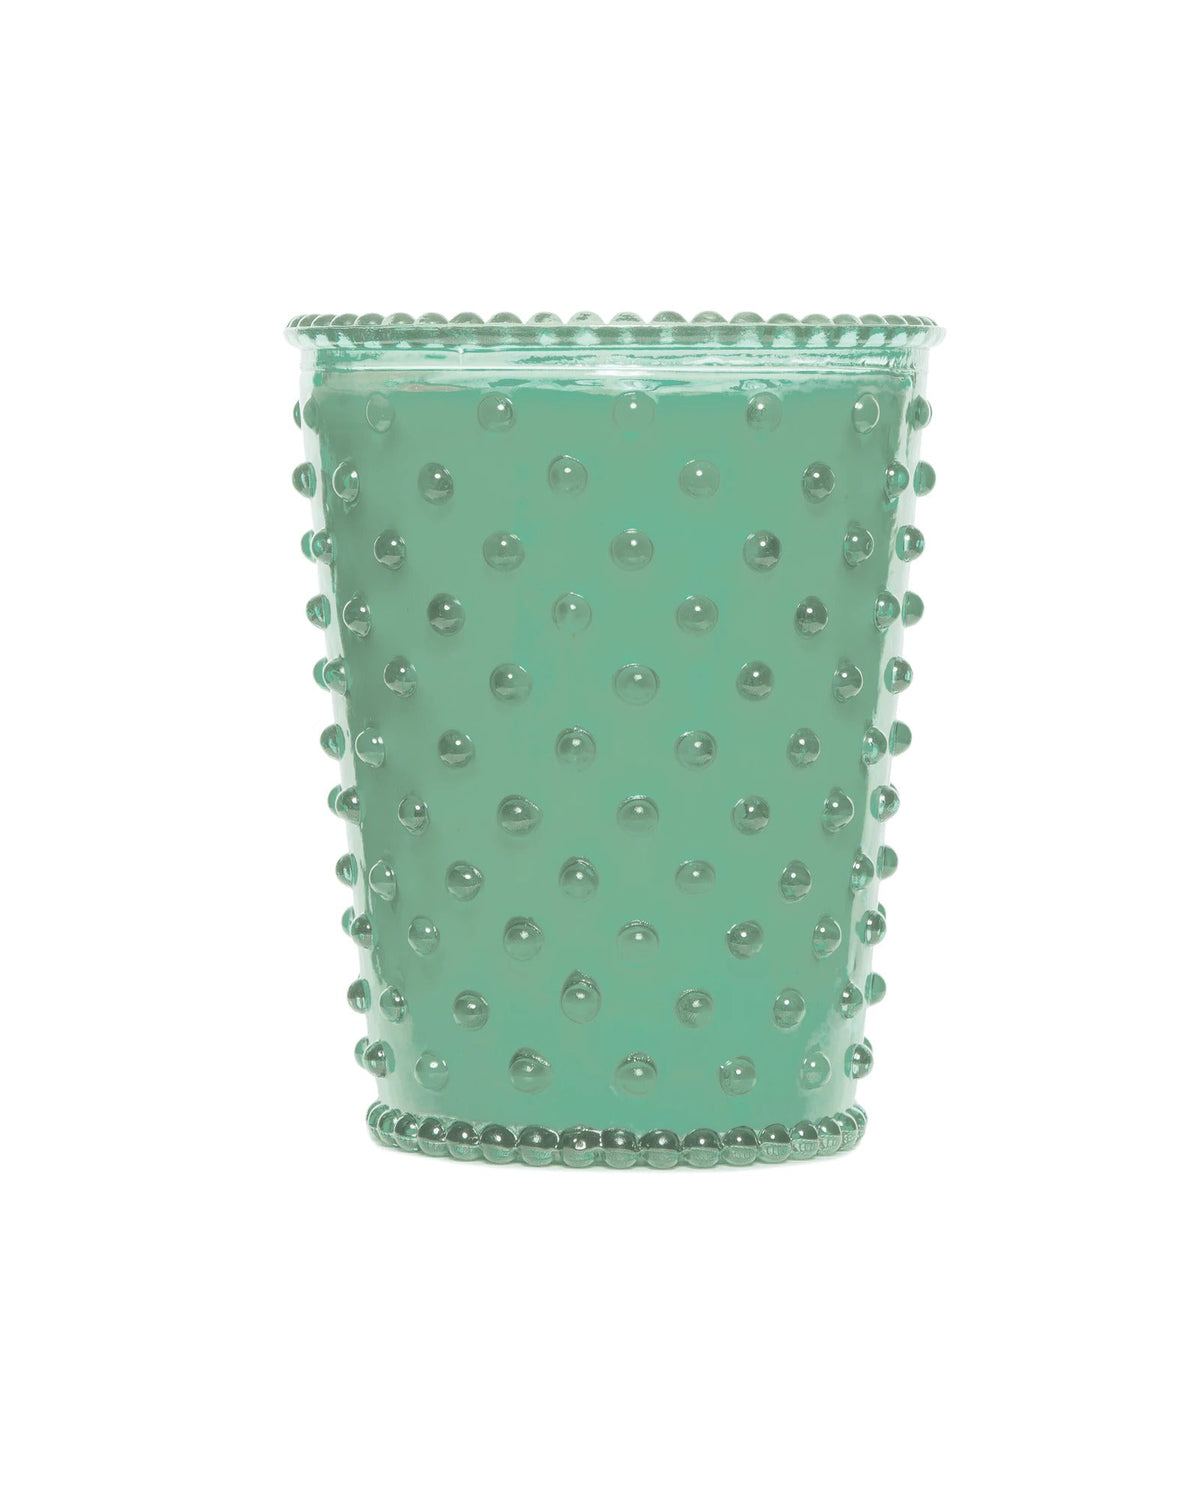 A light green, textured glass cup with raised dot design, Simpatico NO. 95 Eucalpytus Hobnail Glass Candle isolated on a white background.